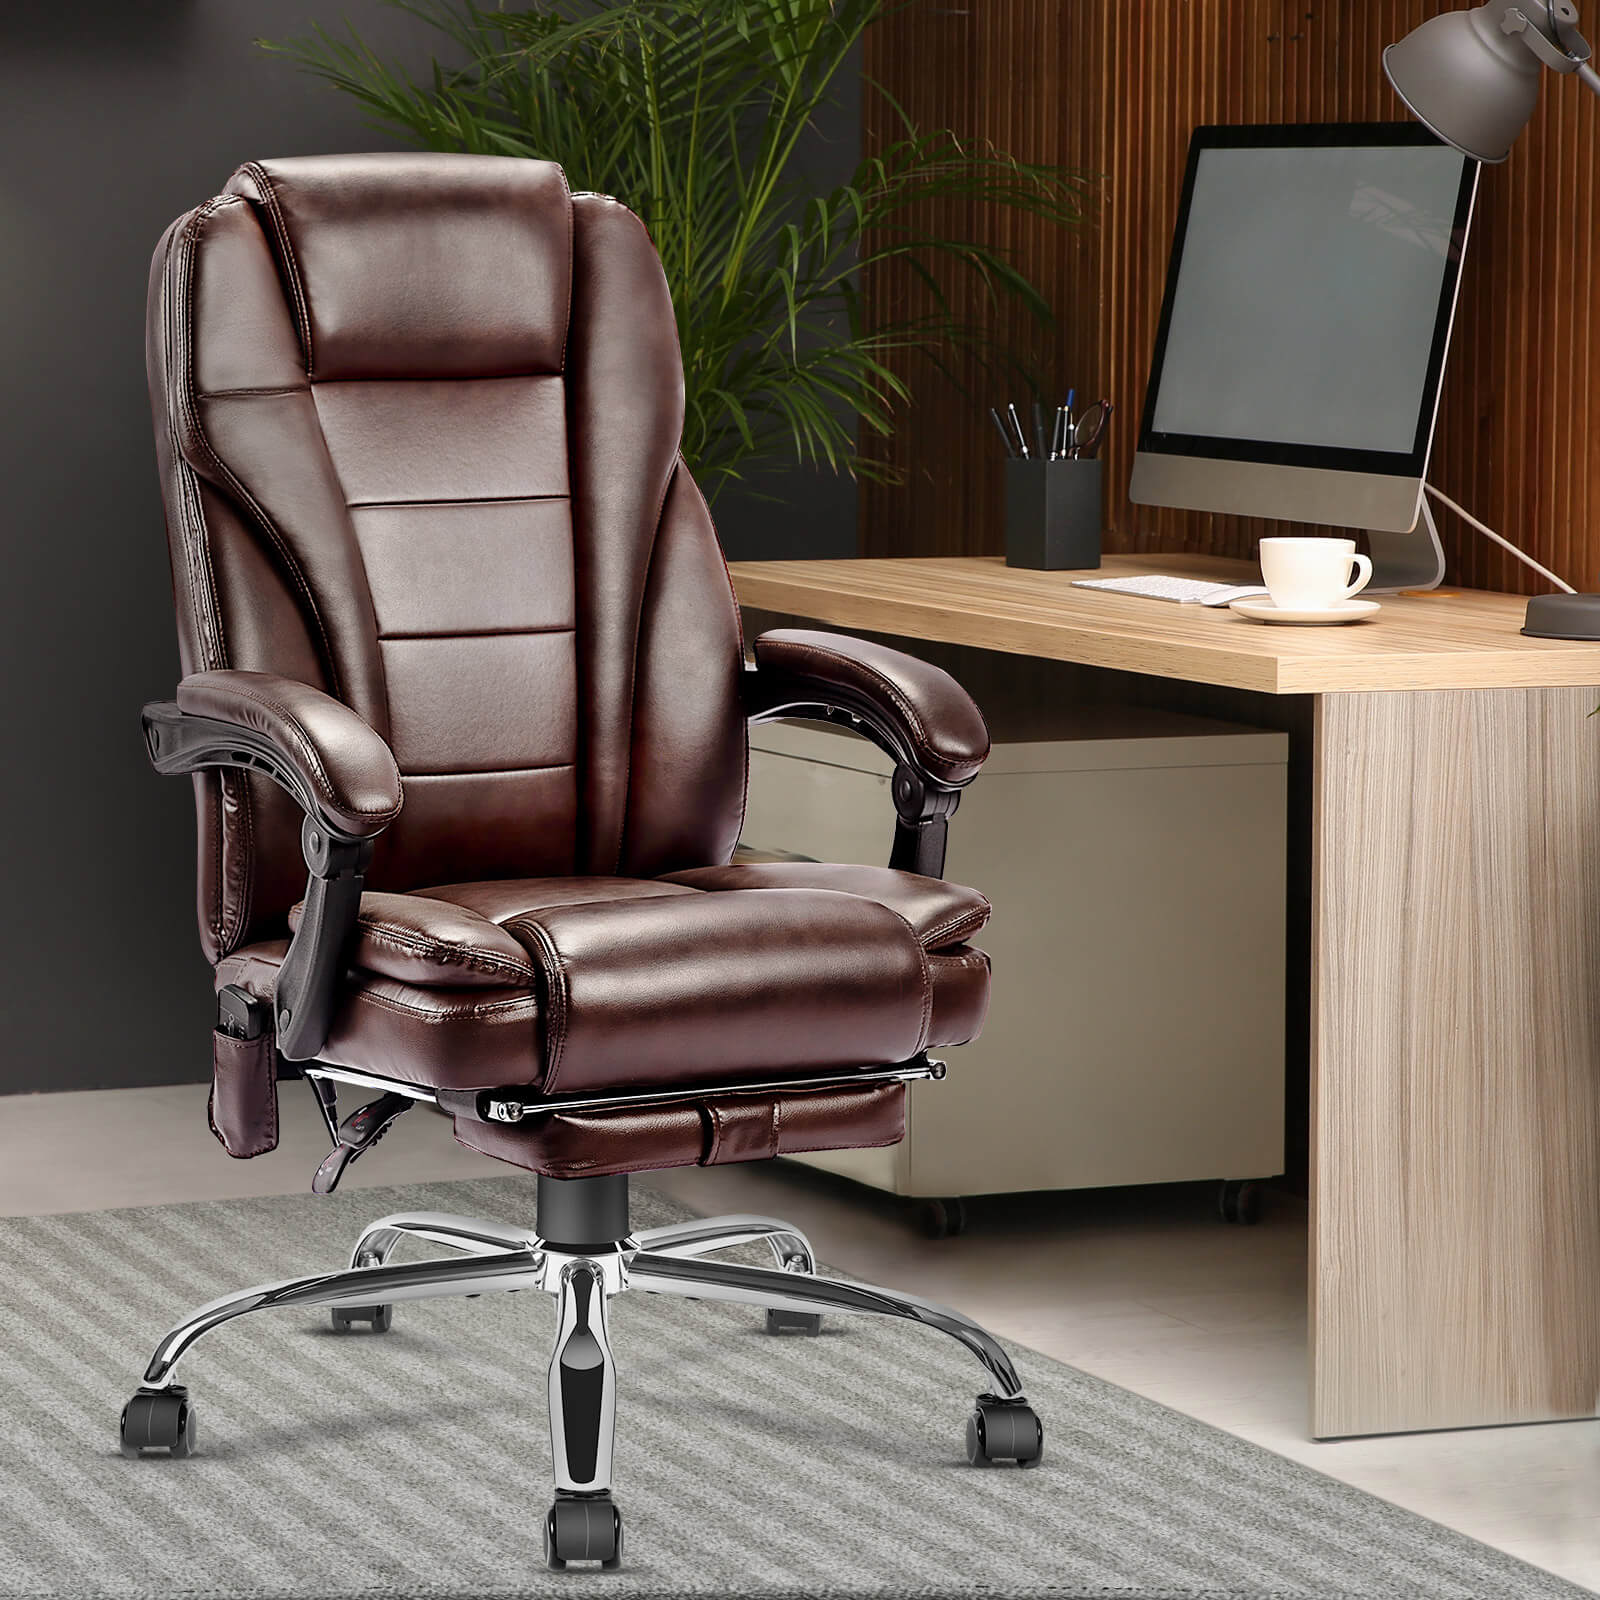 Big and Tall 500lb Executive Office Chair with Quiet Rubber Wheels,High Back  Leather Executive Office Chair with Lumbar Support, Thick Padding and  Ergonomic Design 